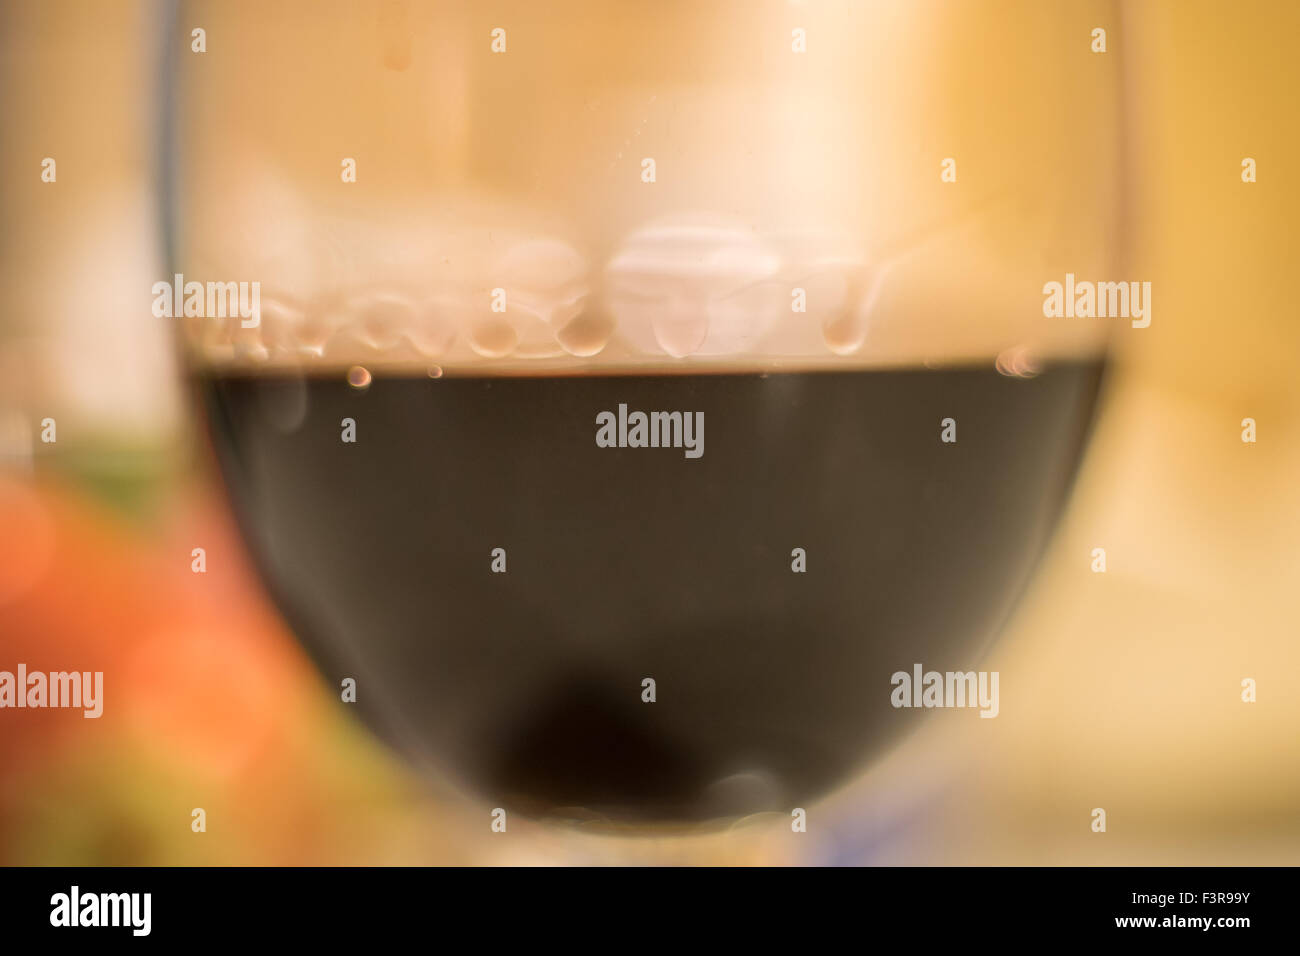 cup of wine with water droplets formed by the surface tension of alcohol Stock Photo